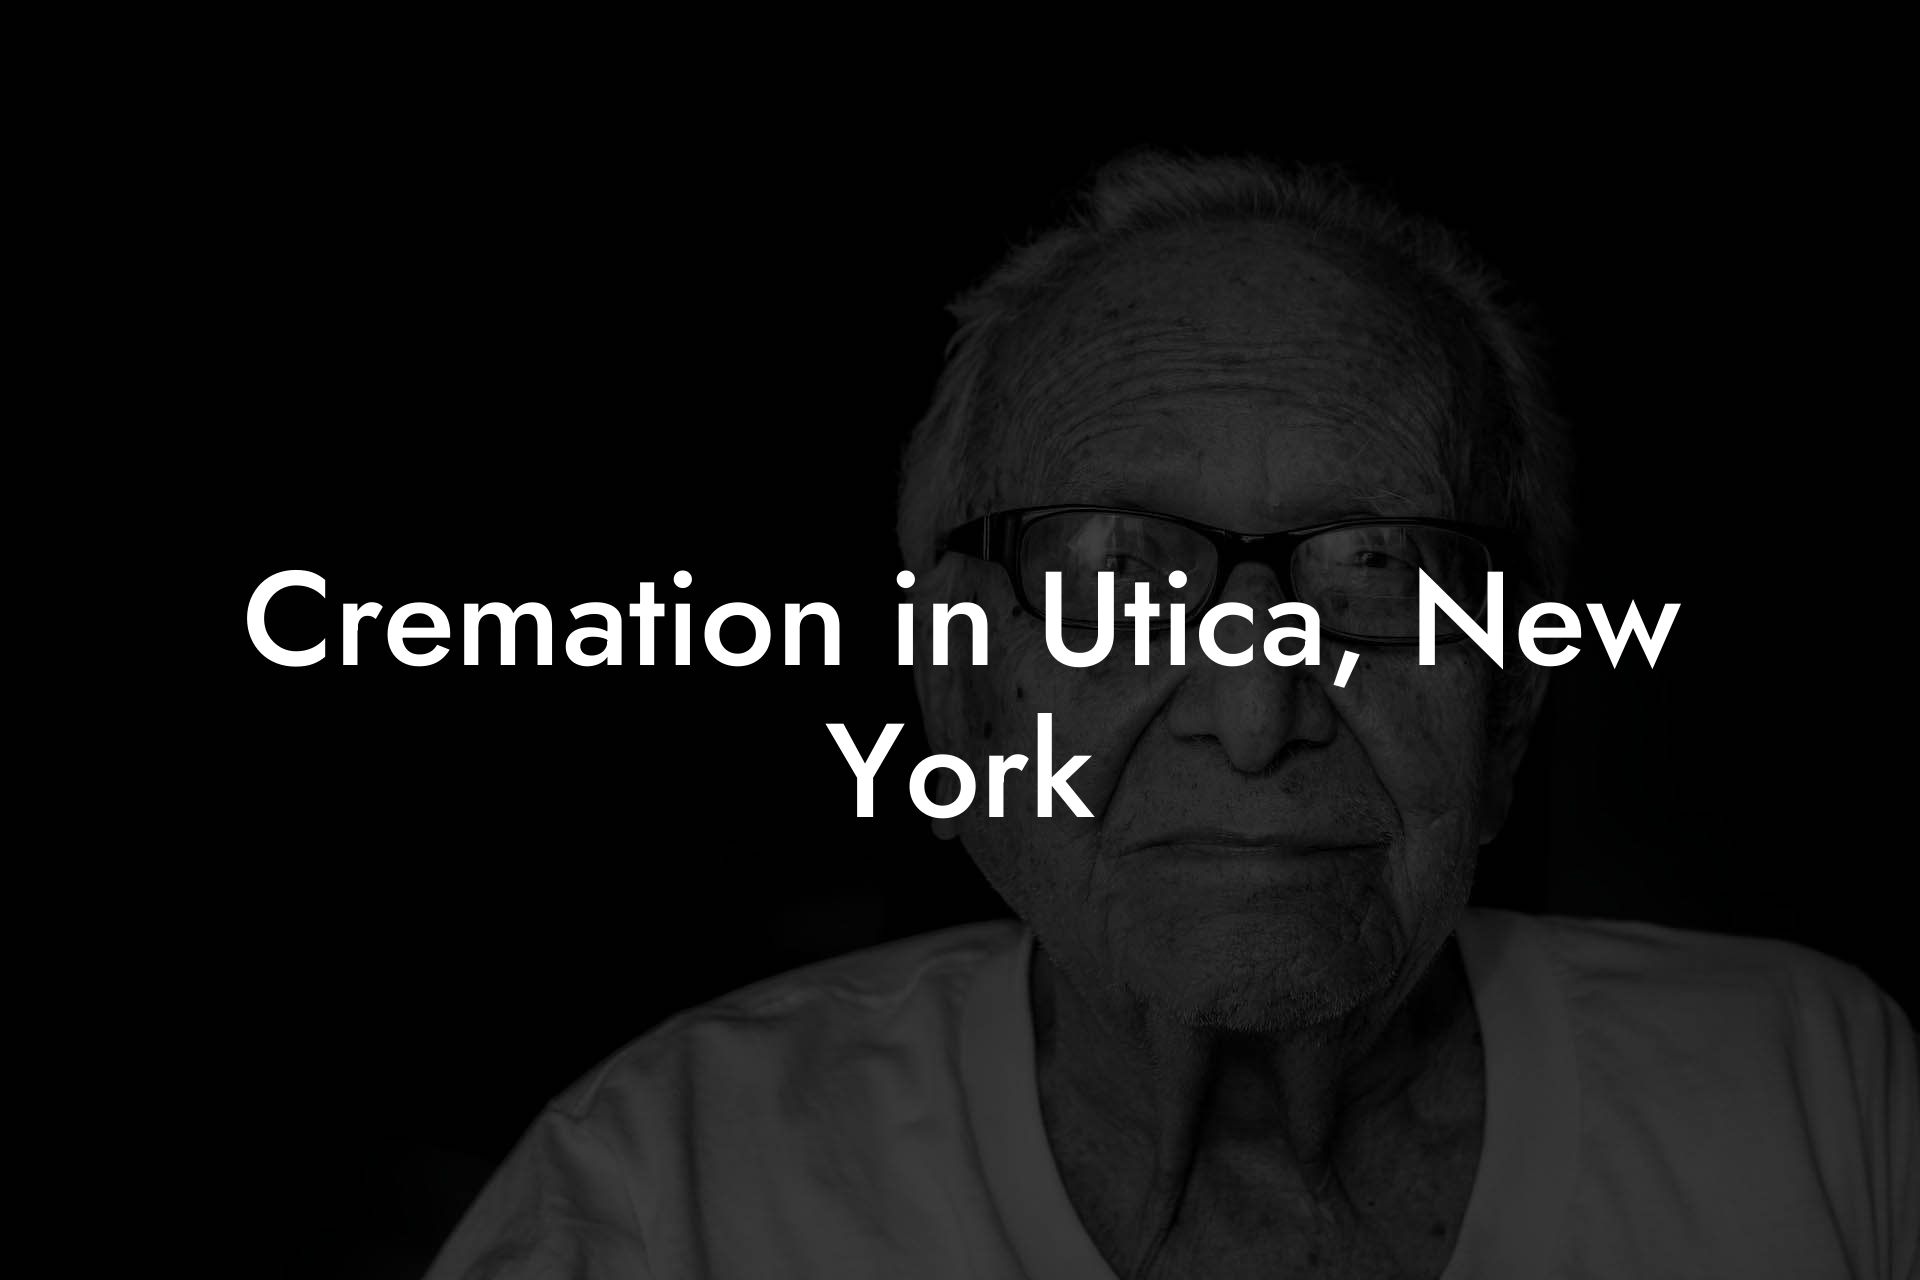 Cremation in Utica, New York